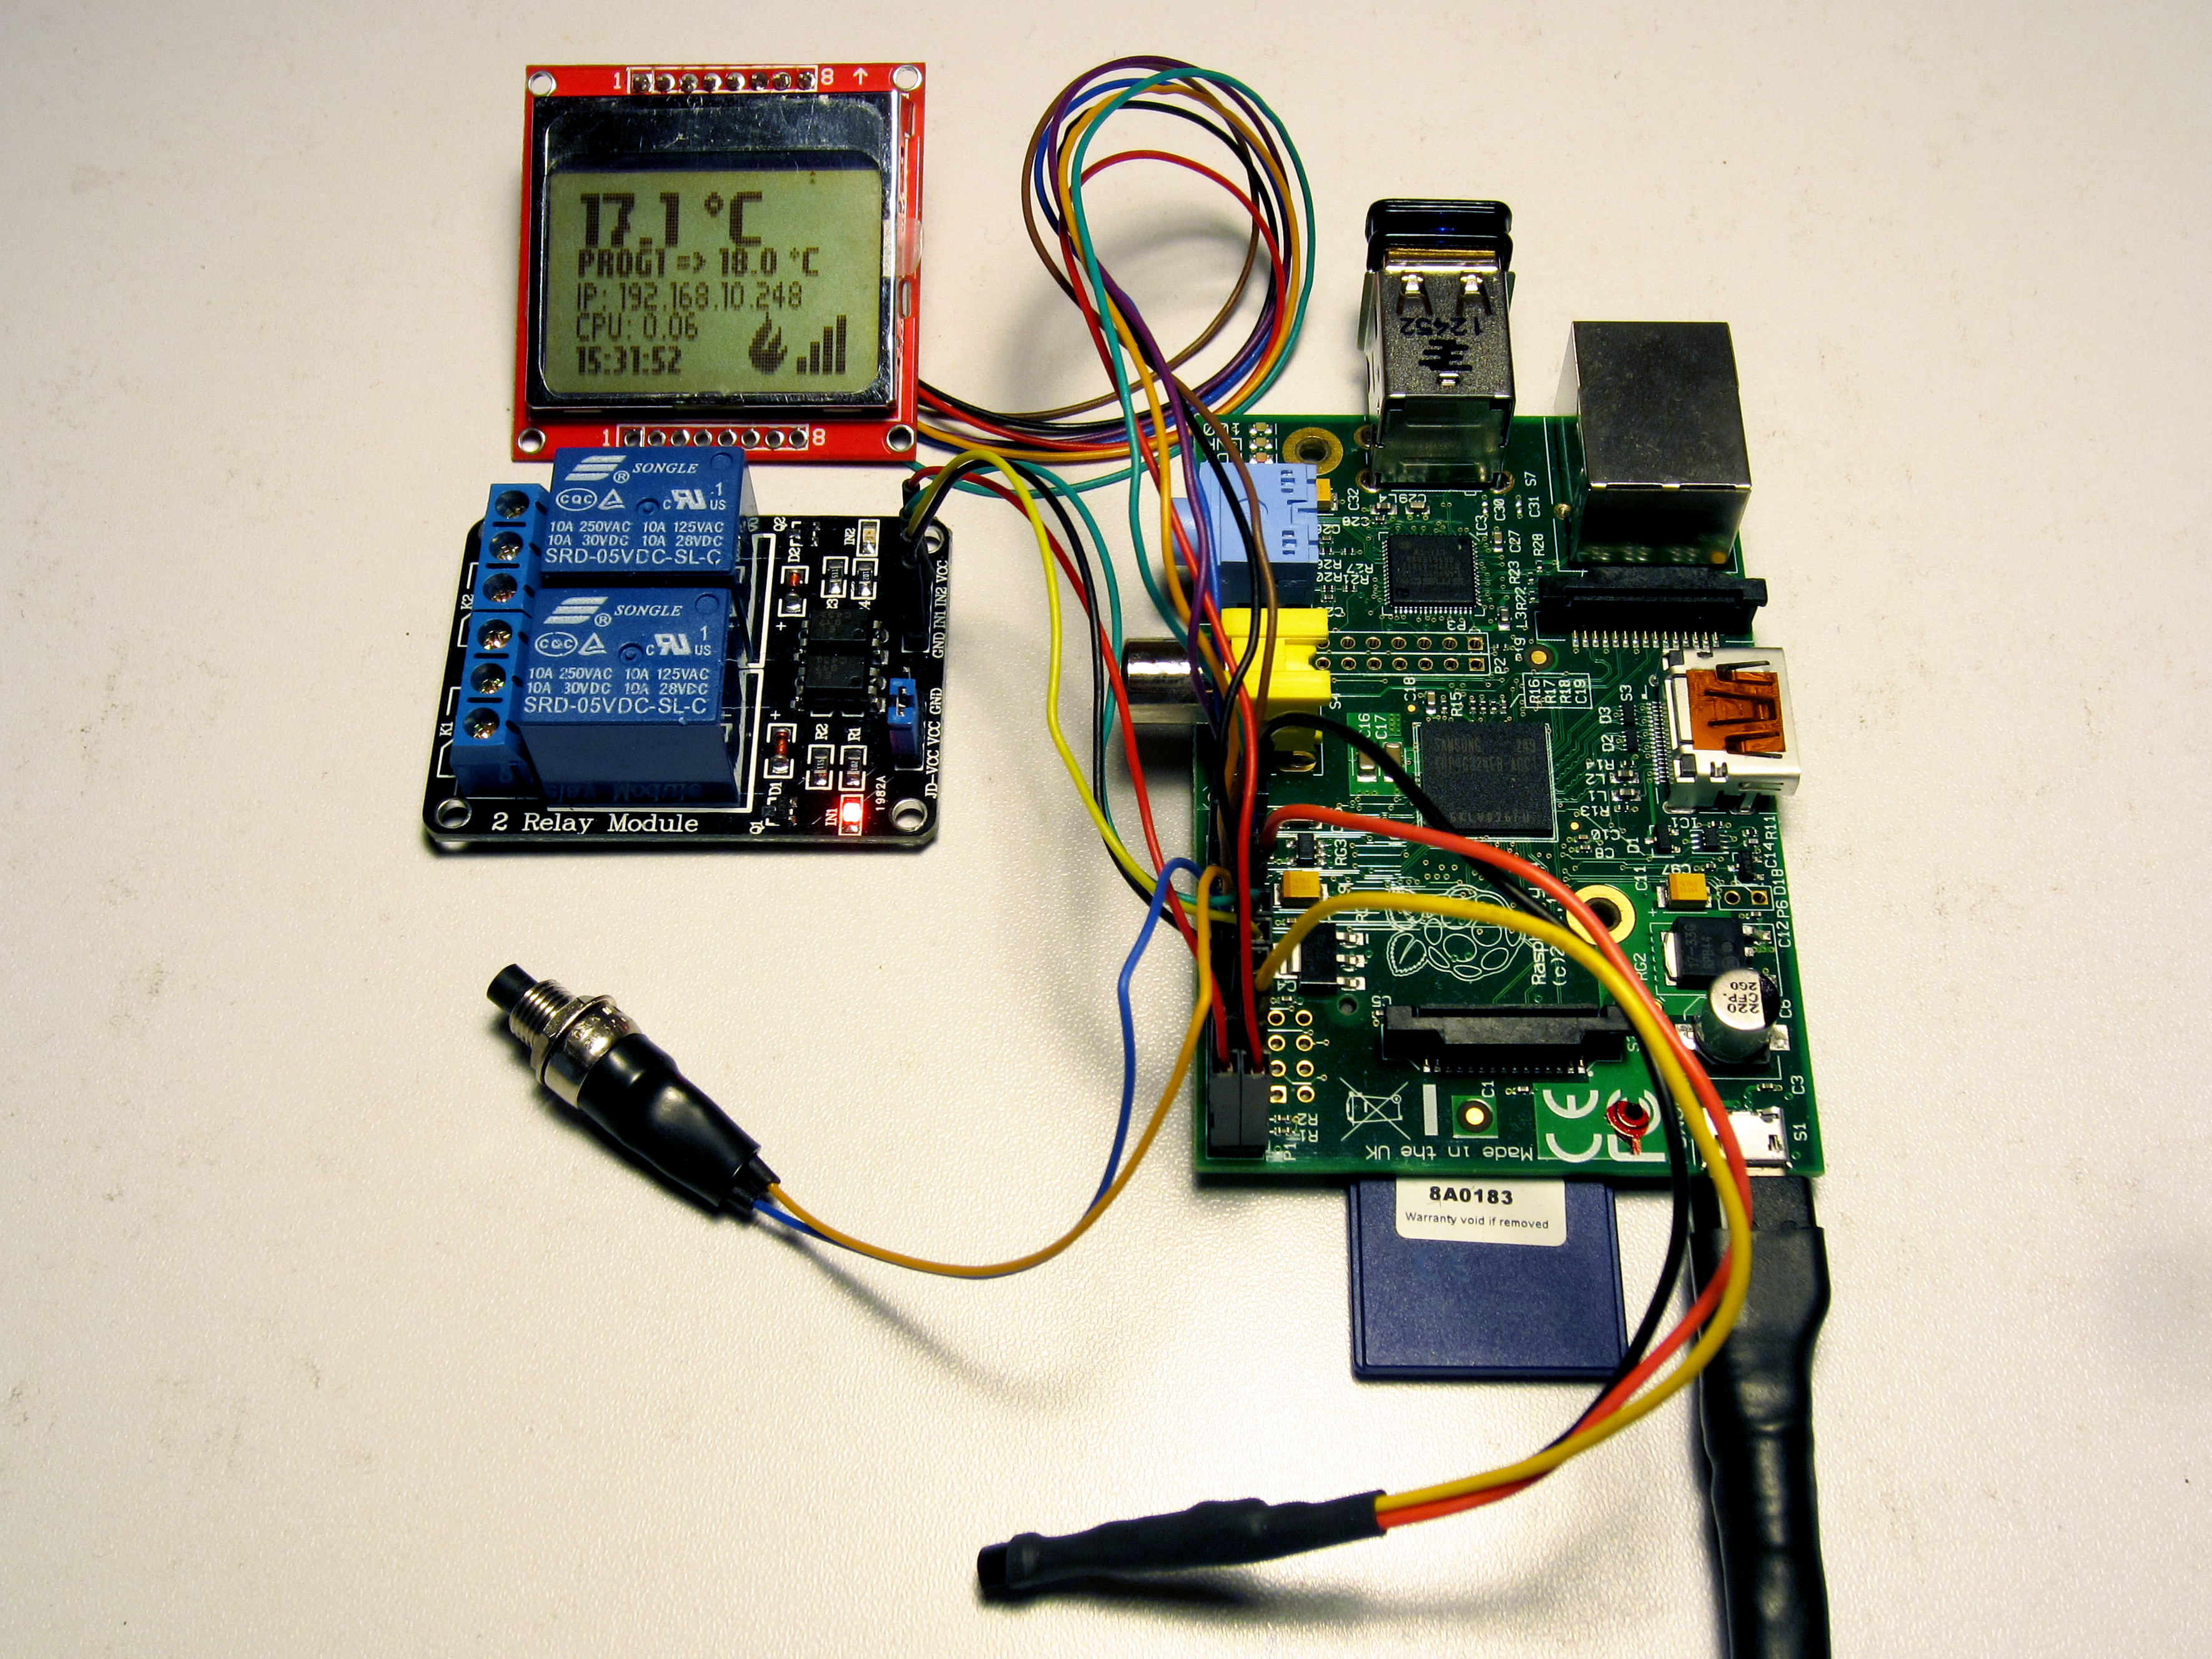 Programmable Thermostat with the Raspberry Pi [rigacci.org]